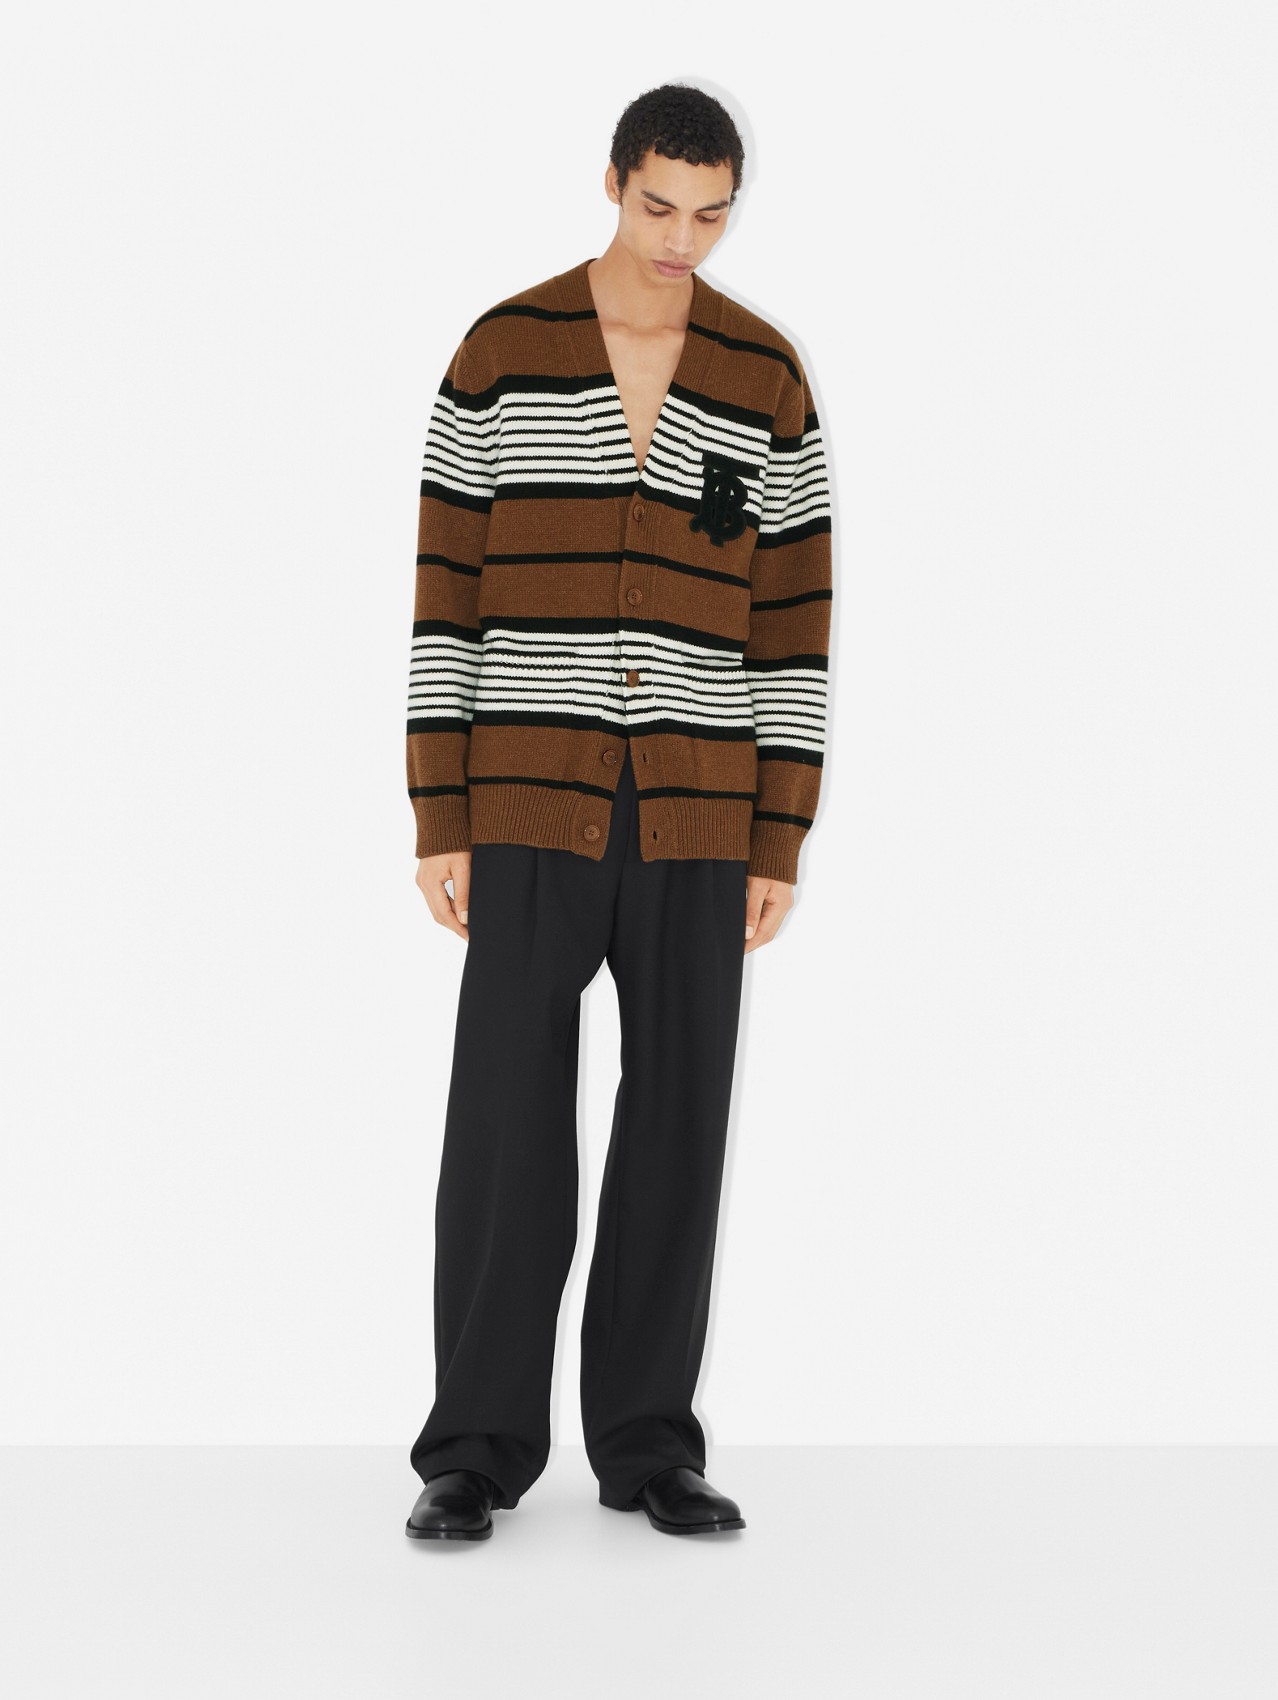 Men's Designer Knitwear | Sweaters & Cardigans | Burberry® Official